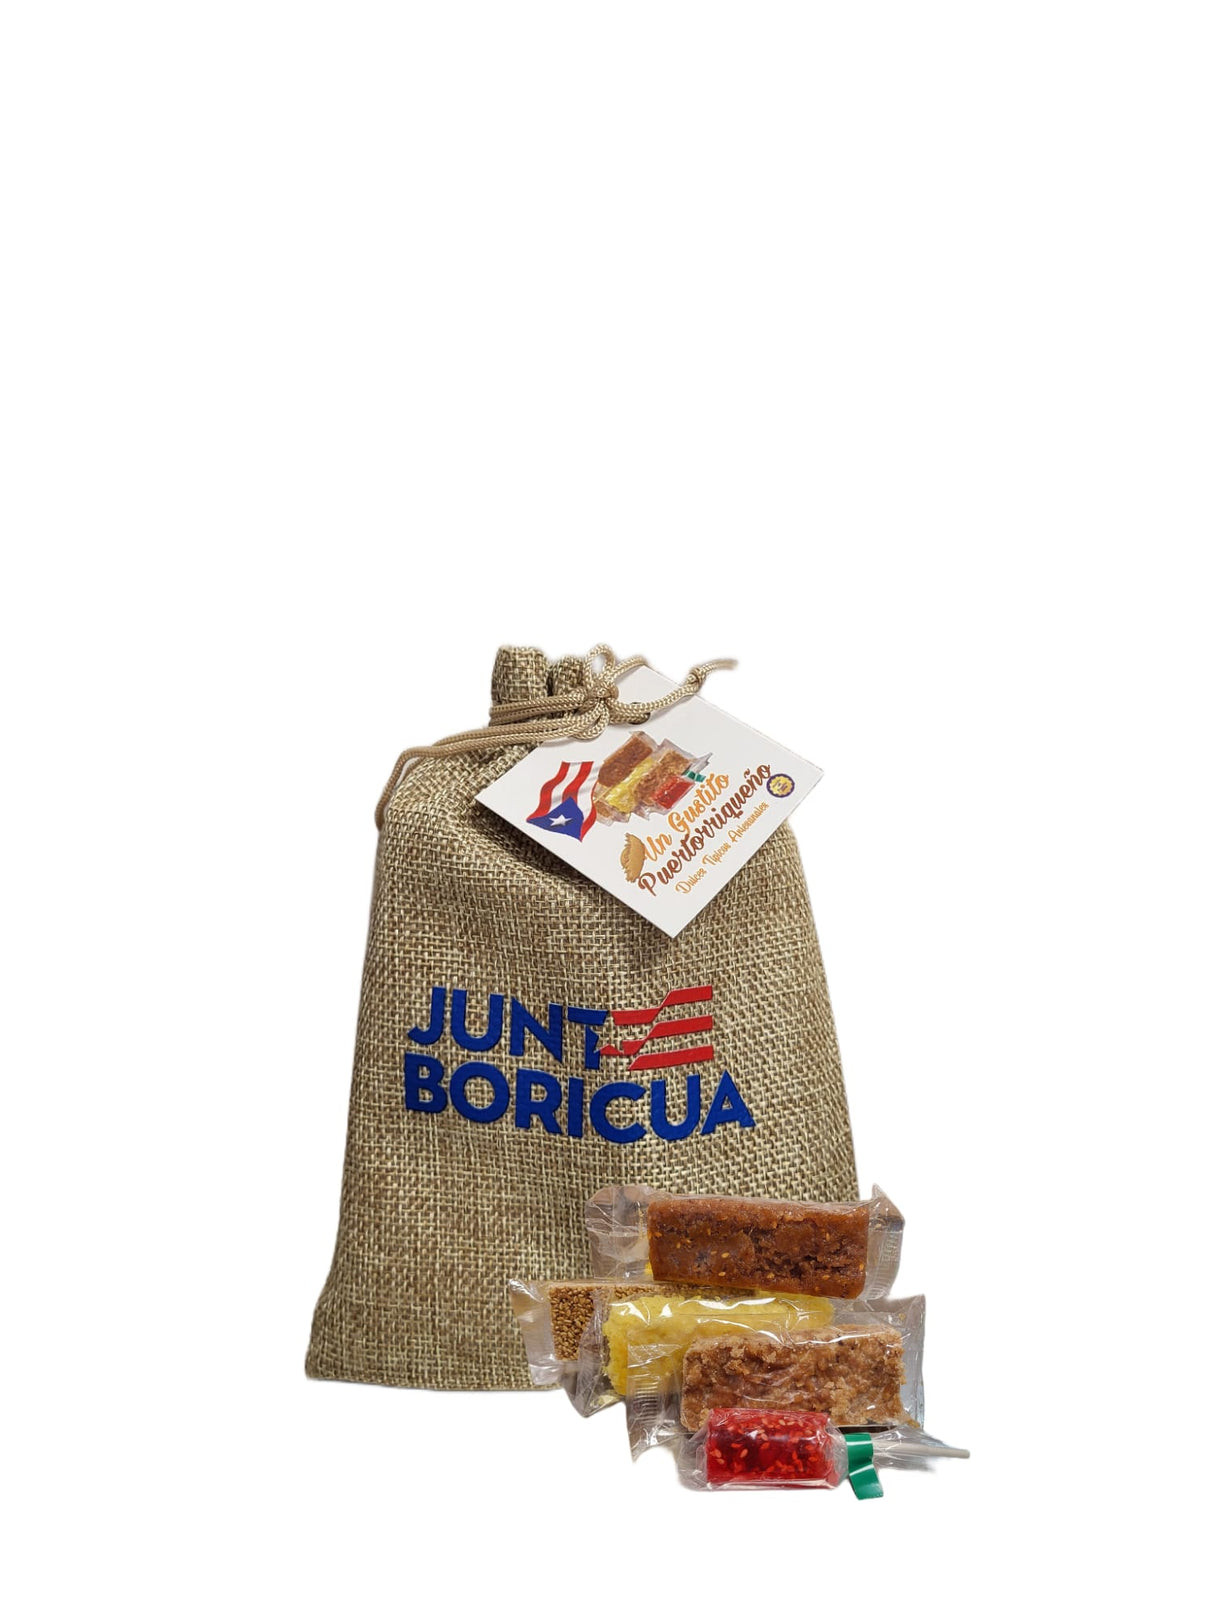 Dulce del Campo Assorted Sachet"Bites"with Small Flag